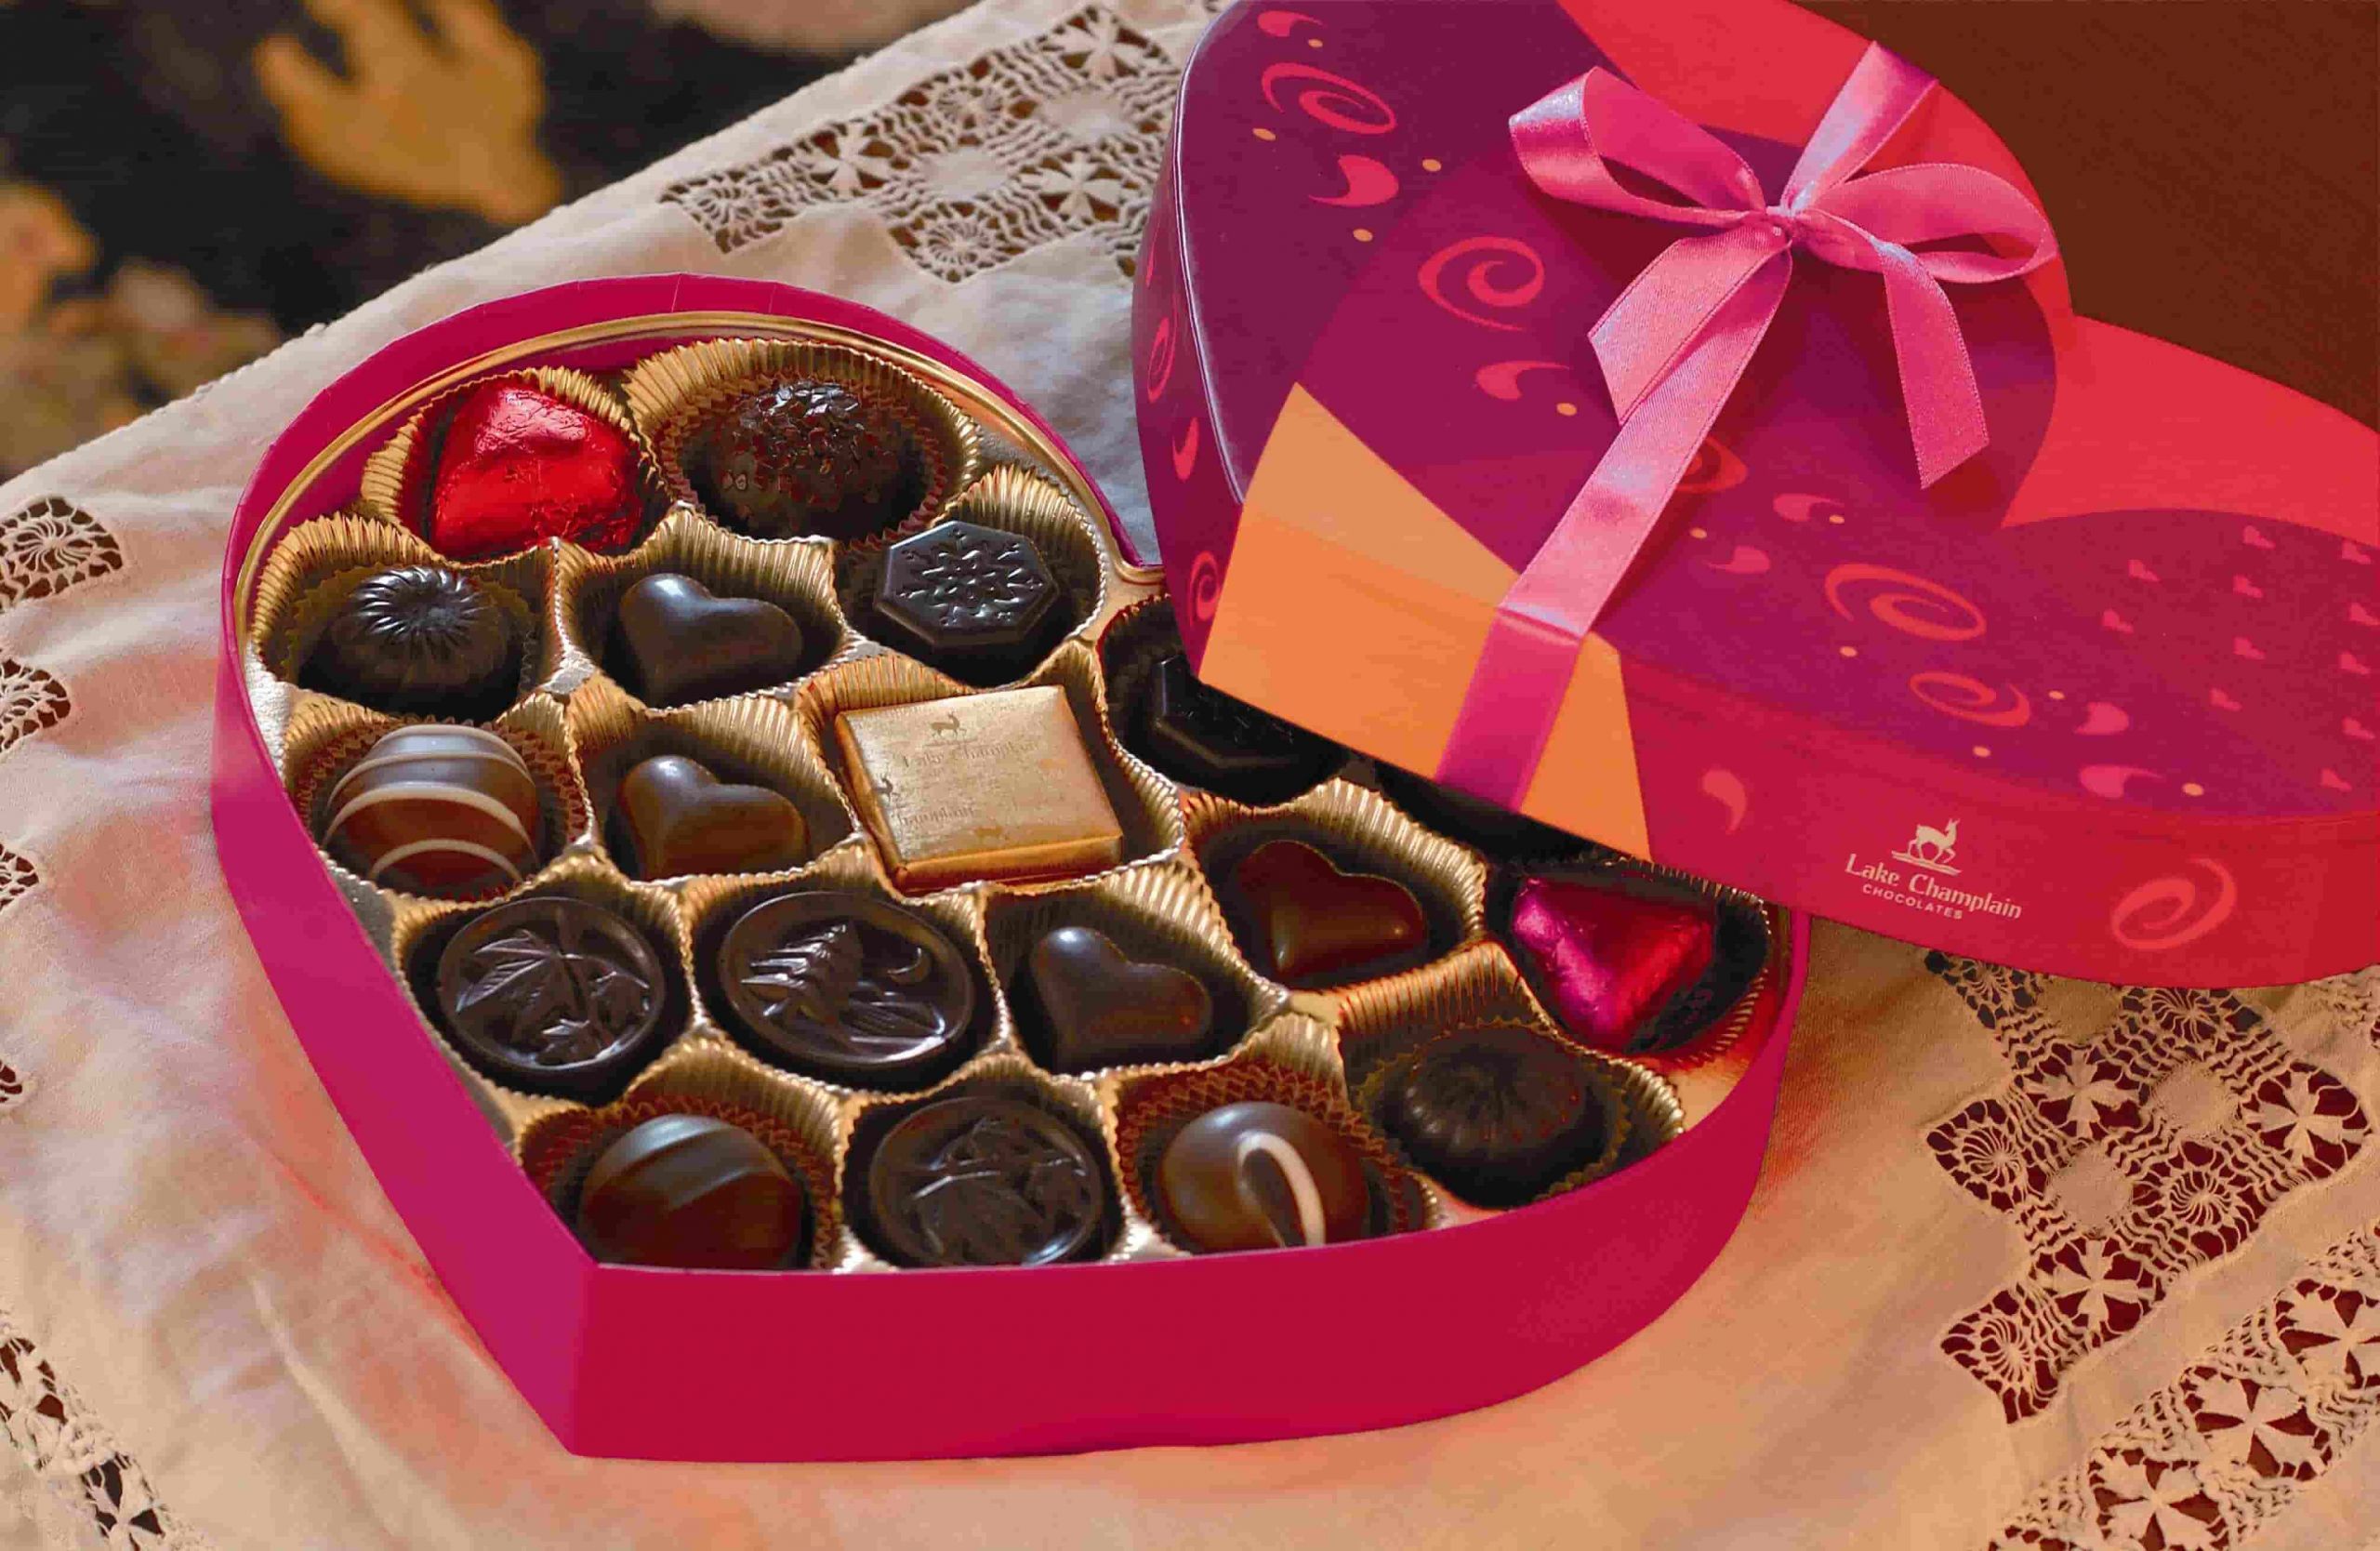 Valentines Day Candy Gift
 Mesmerizing Valentine s Day Chocolate & Chocolate Gift